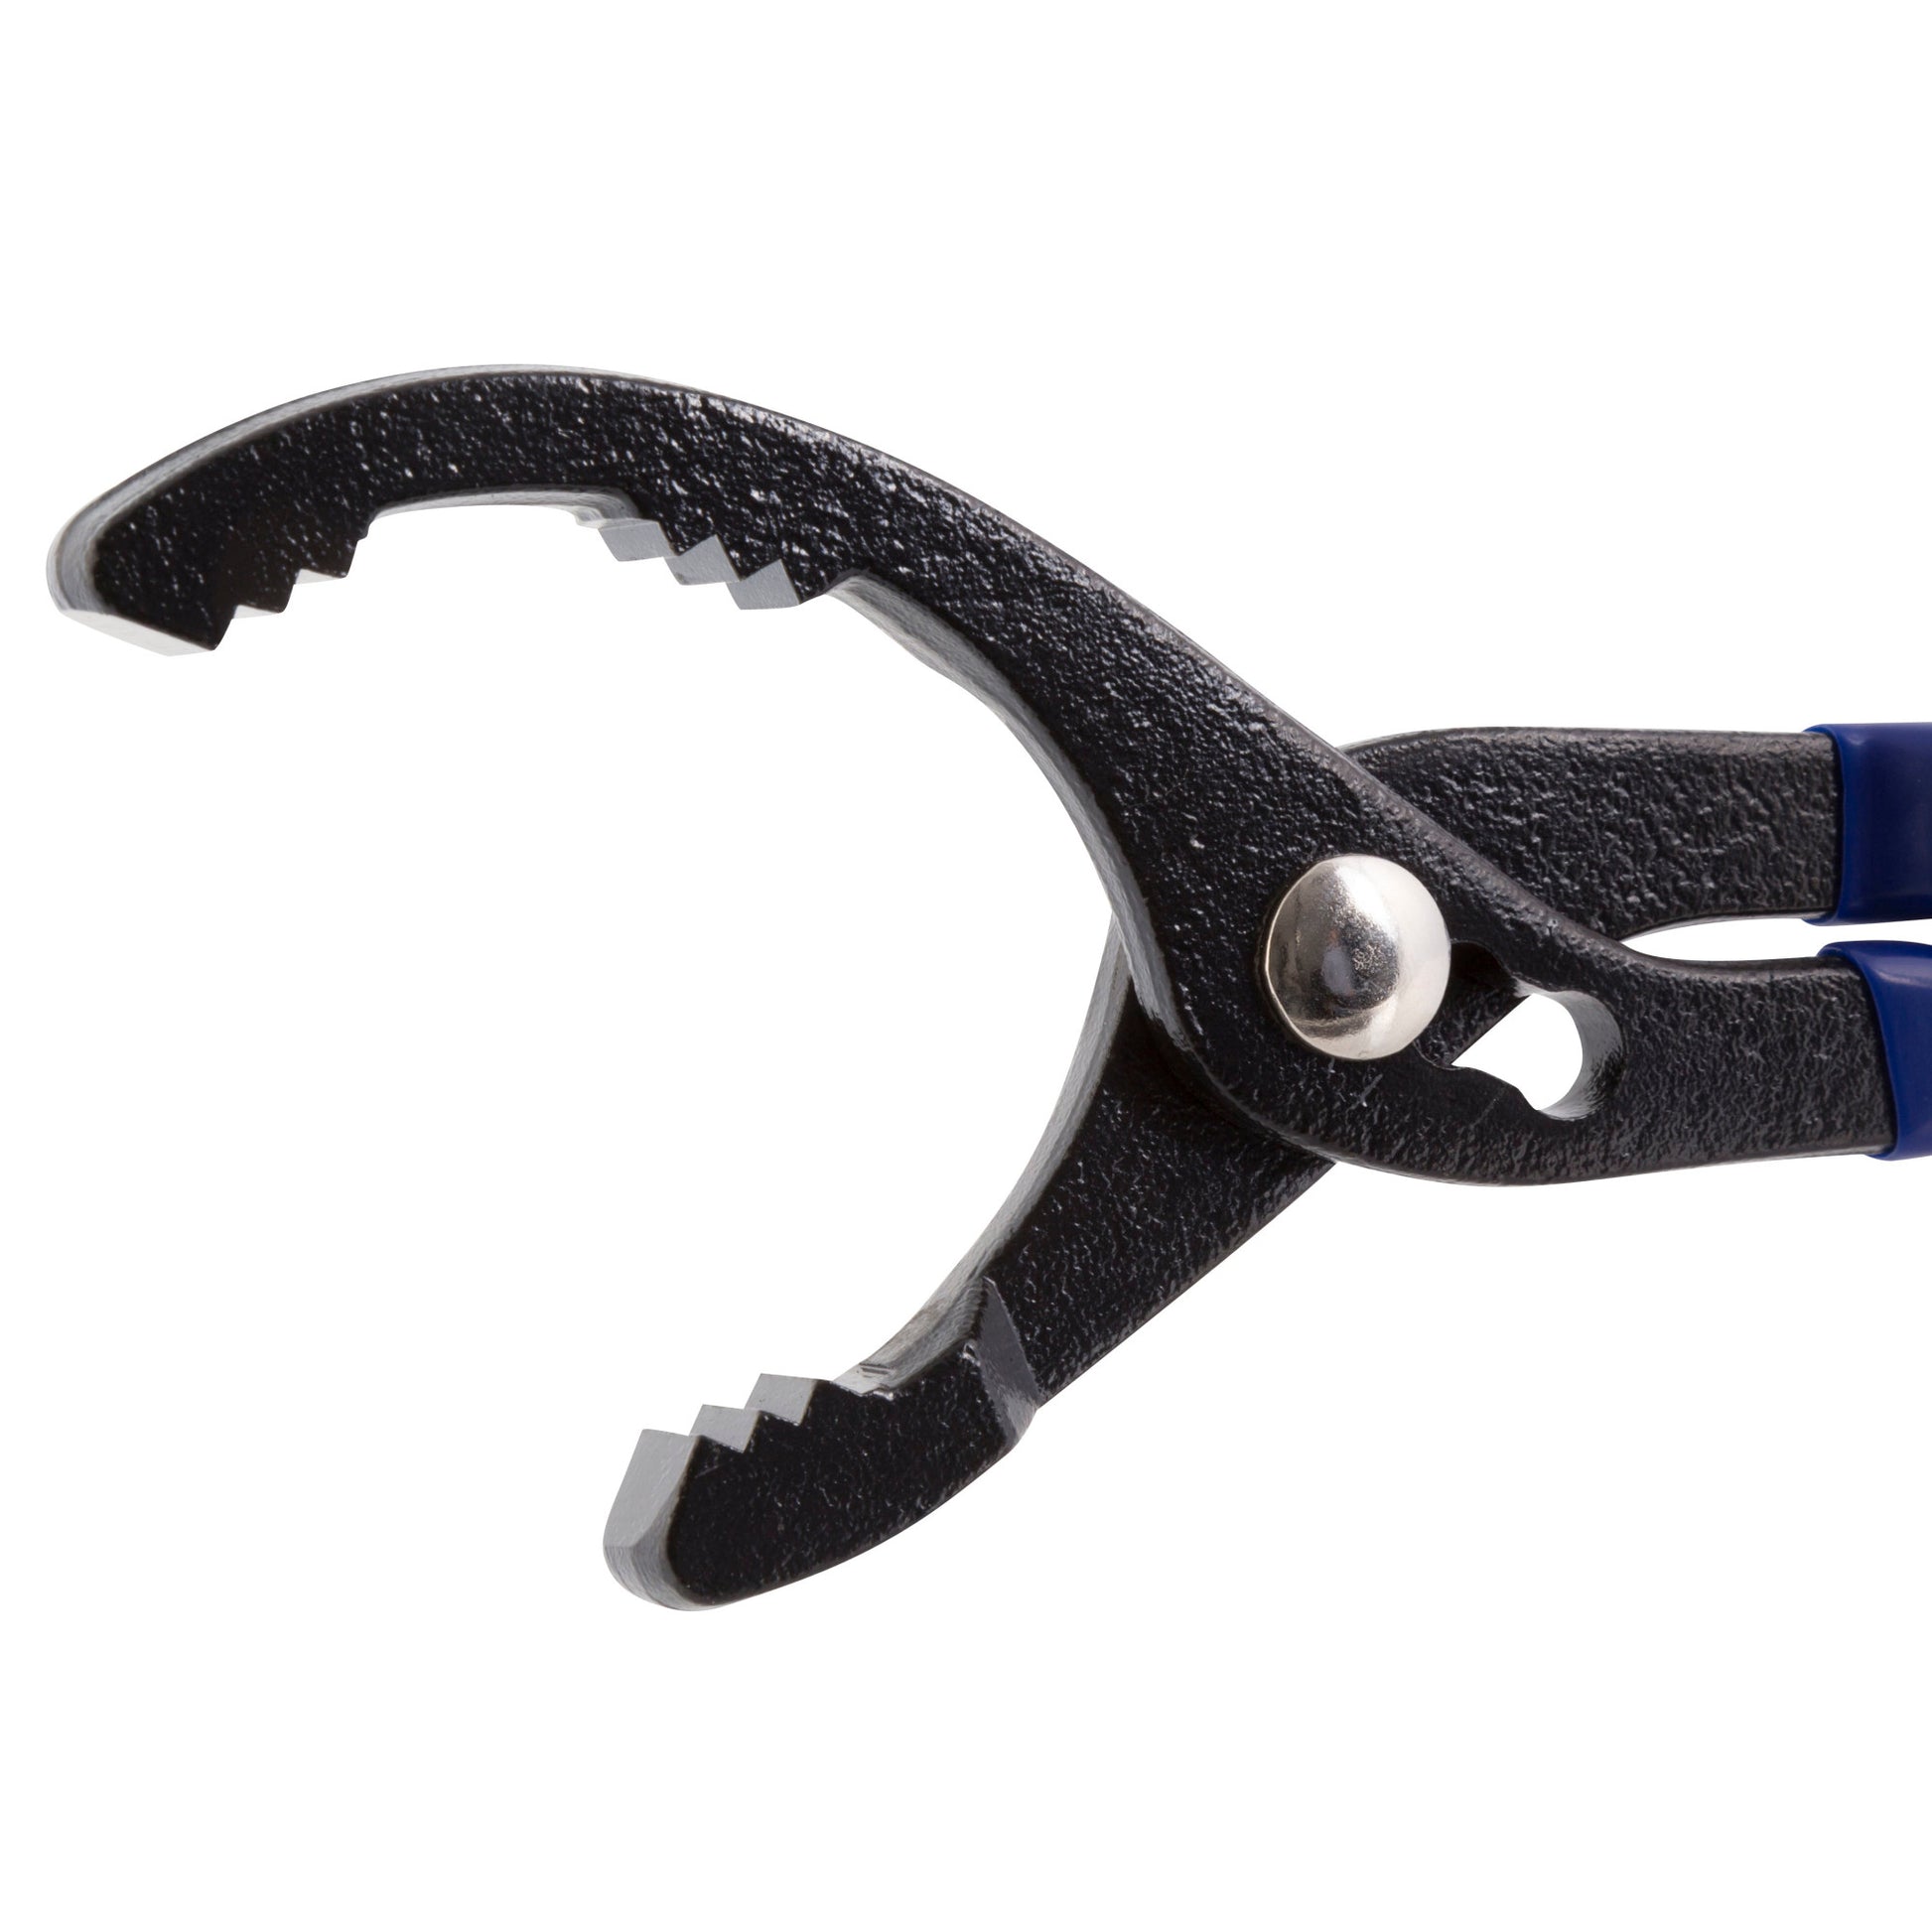 OIL FILTER PLIERS 62MM-110MM IXIF-101